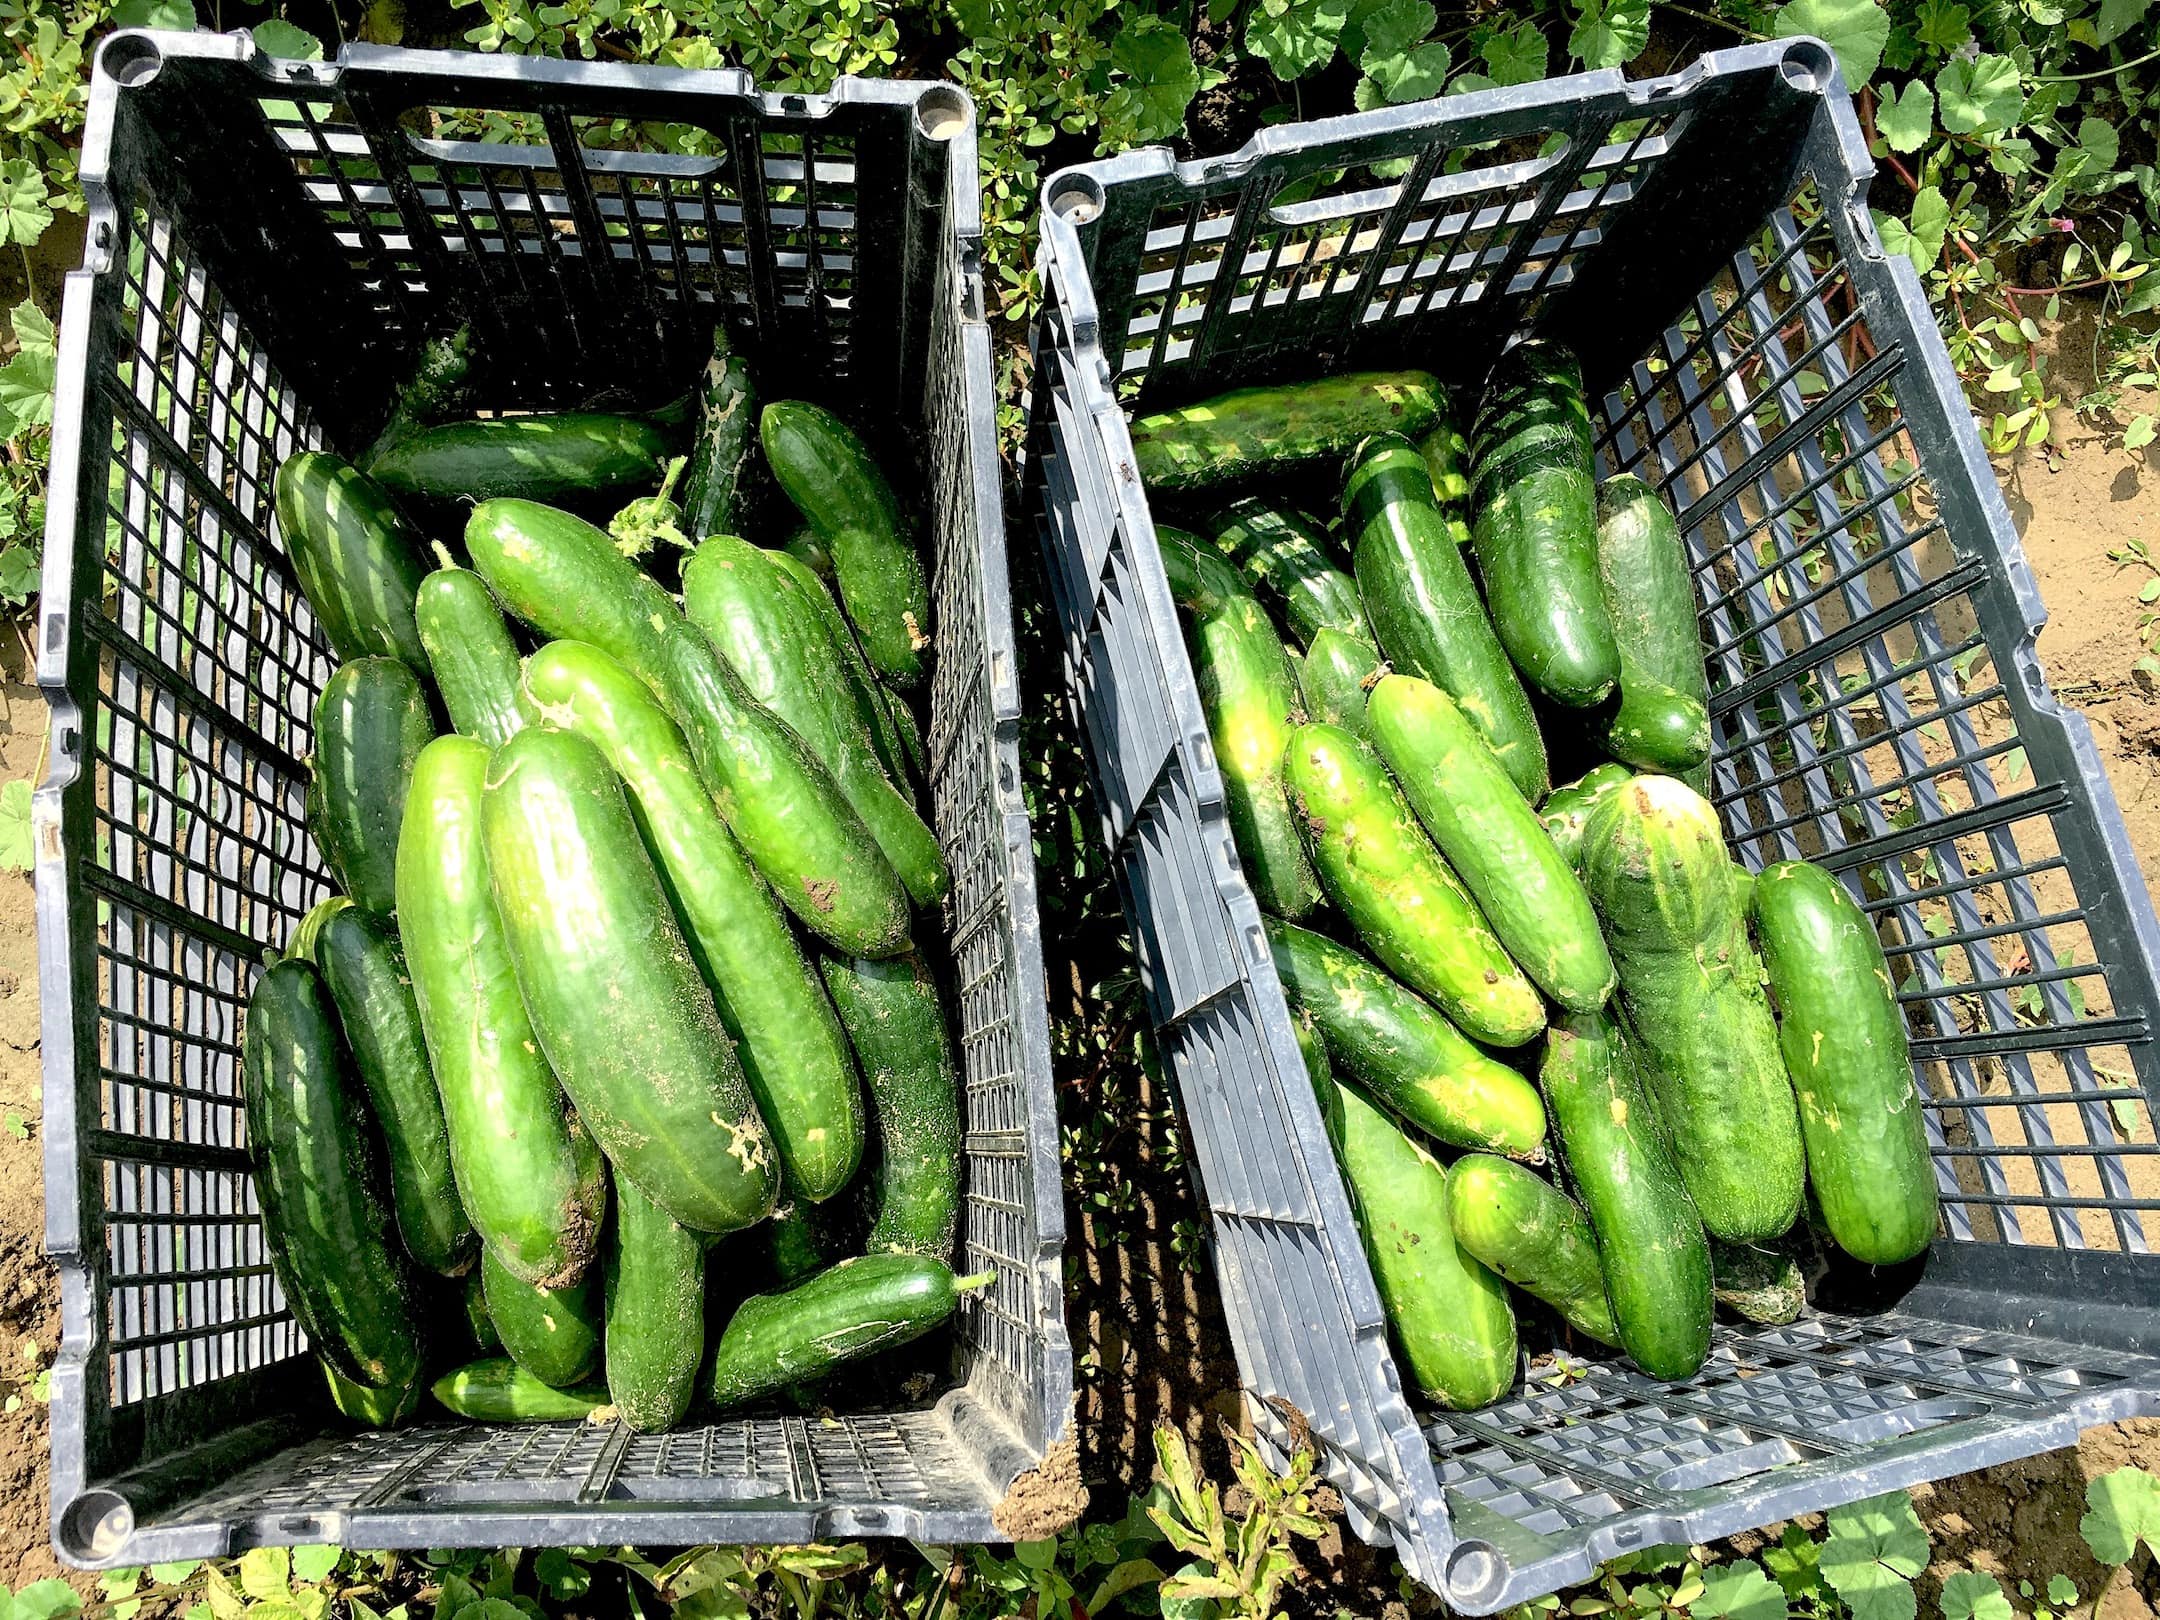 Cucumbers - we have lots. We will be making pickles.